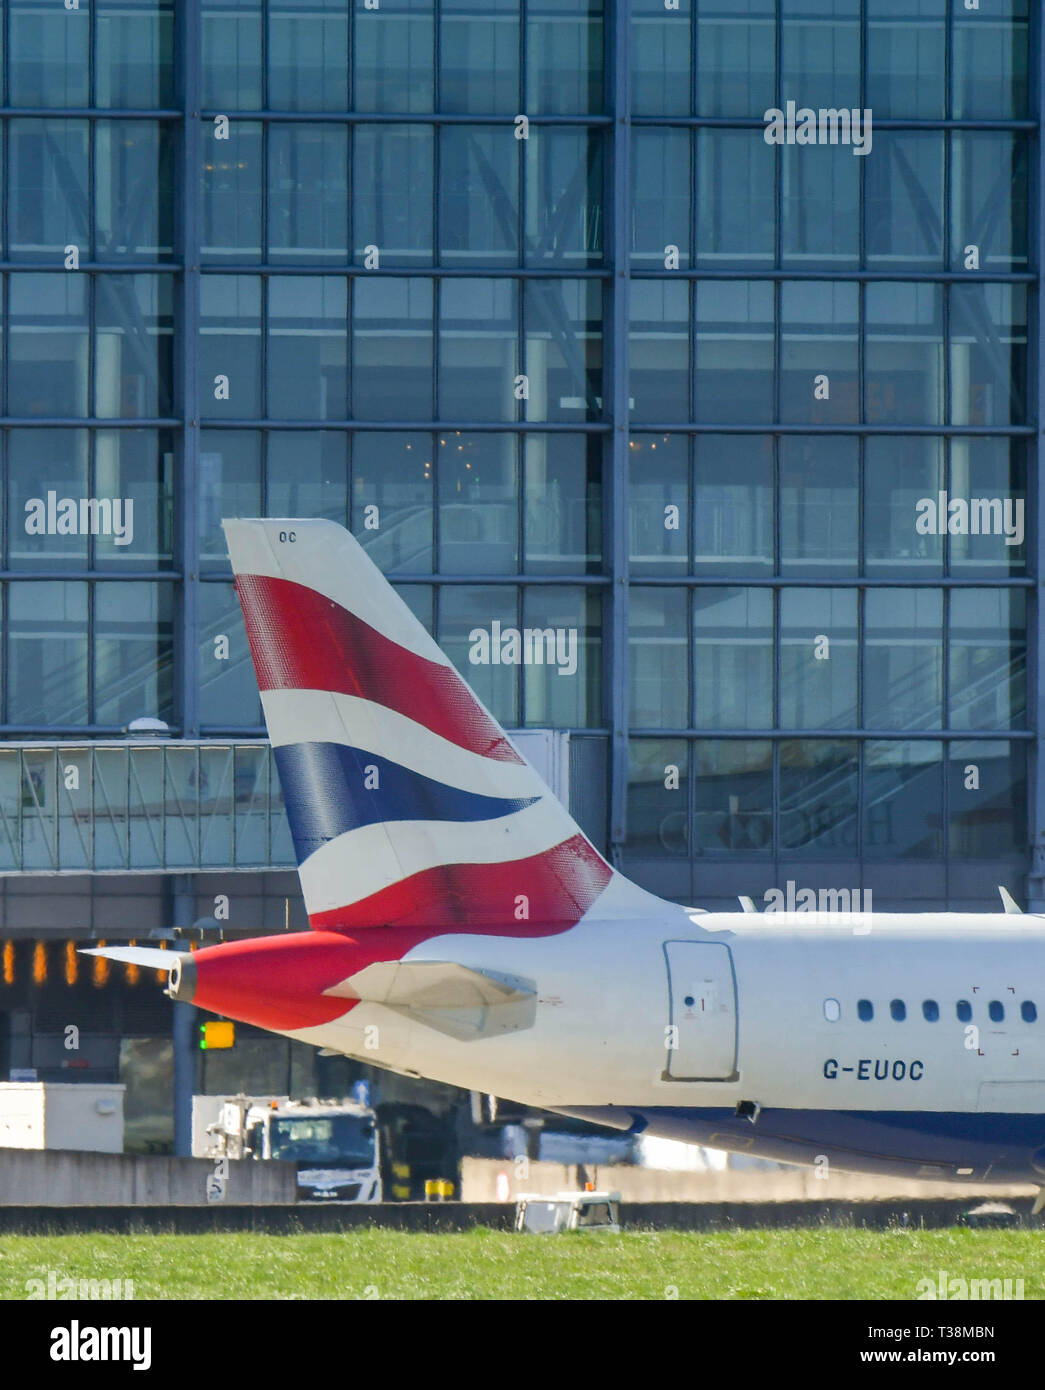 LONDON, ENGLAND - MARCH 2019: British Airways Airbus A319 airliner taxiing past the Terminal 5 building at London Heathrow Airport. Stock Photo